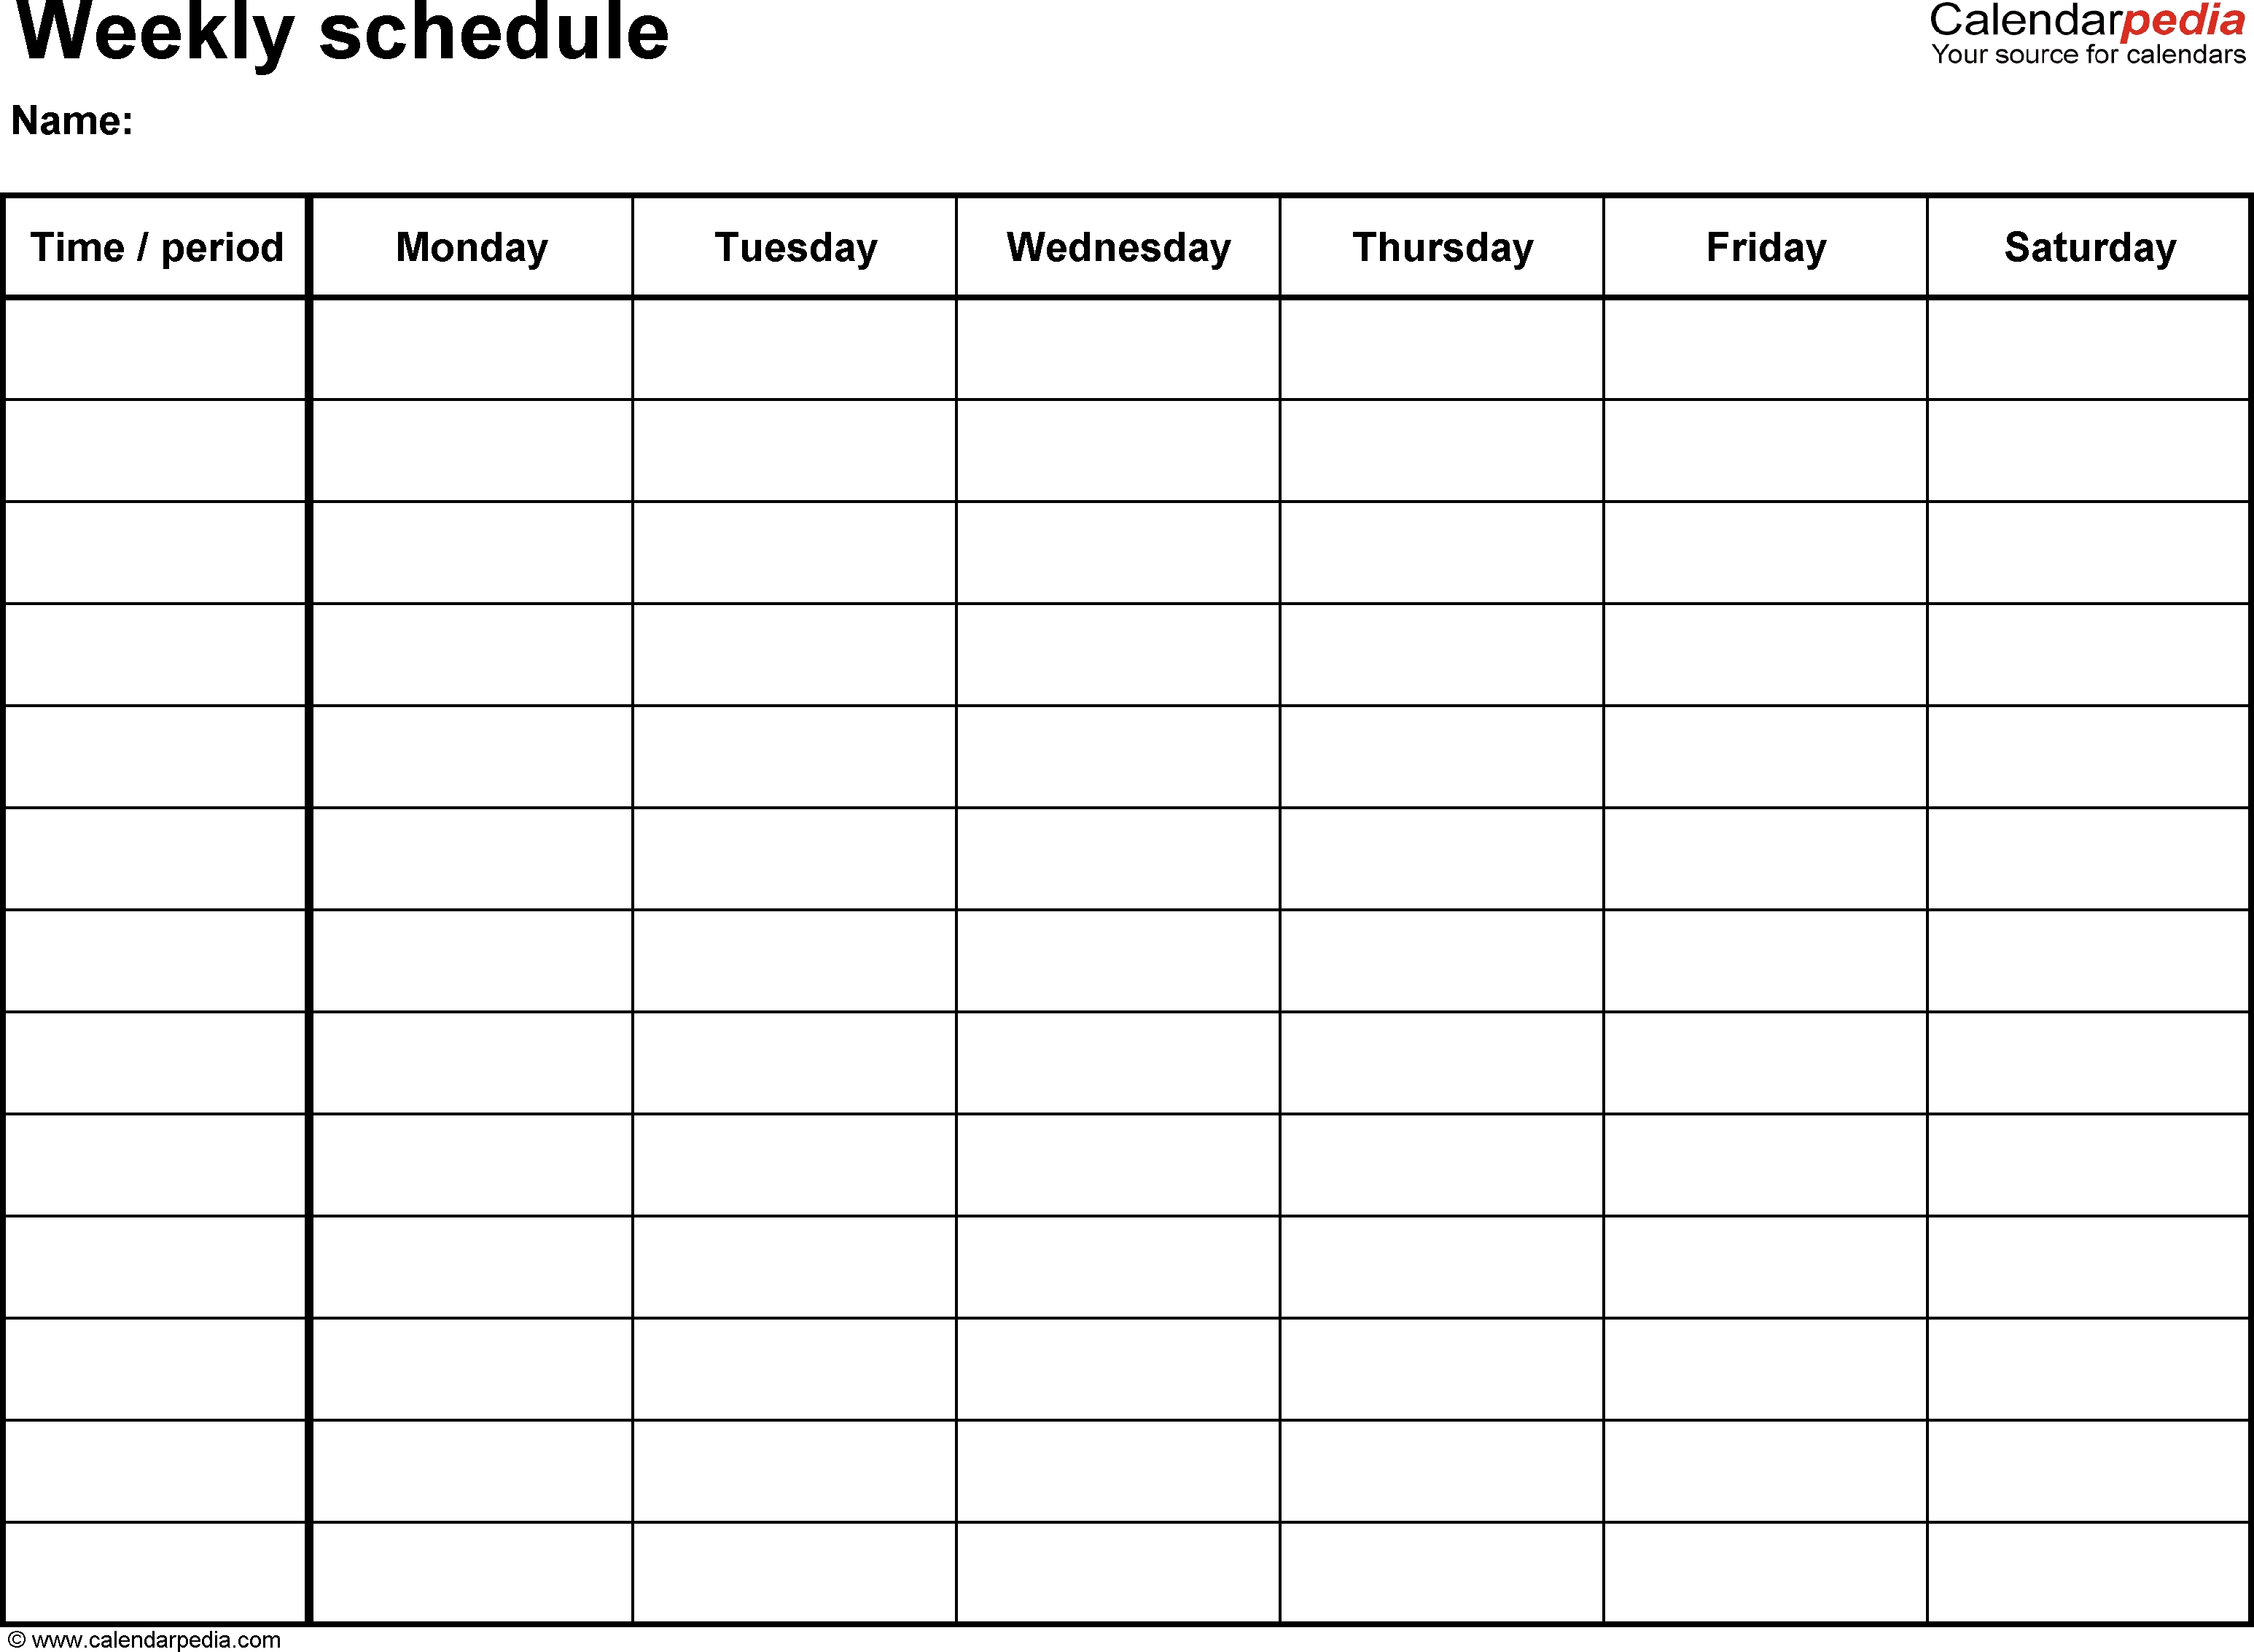 Free Weekly Schedule Templates For Pdf - 18 Templates Free 8X10 Calendar Template